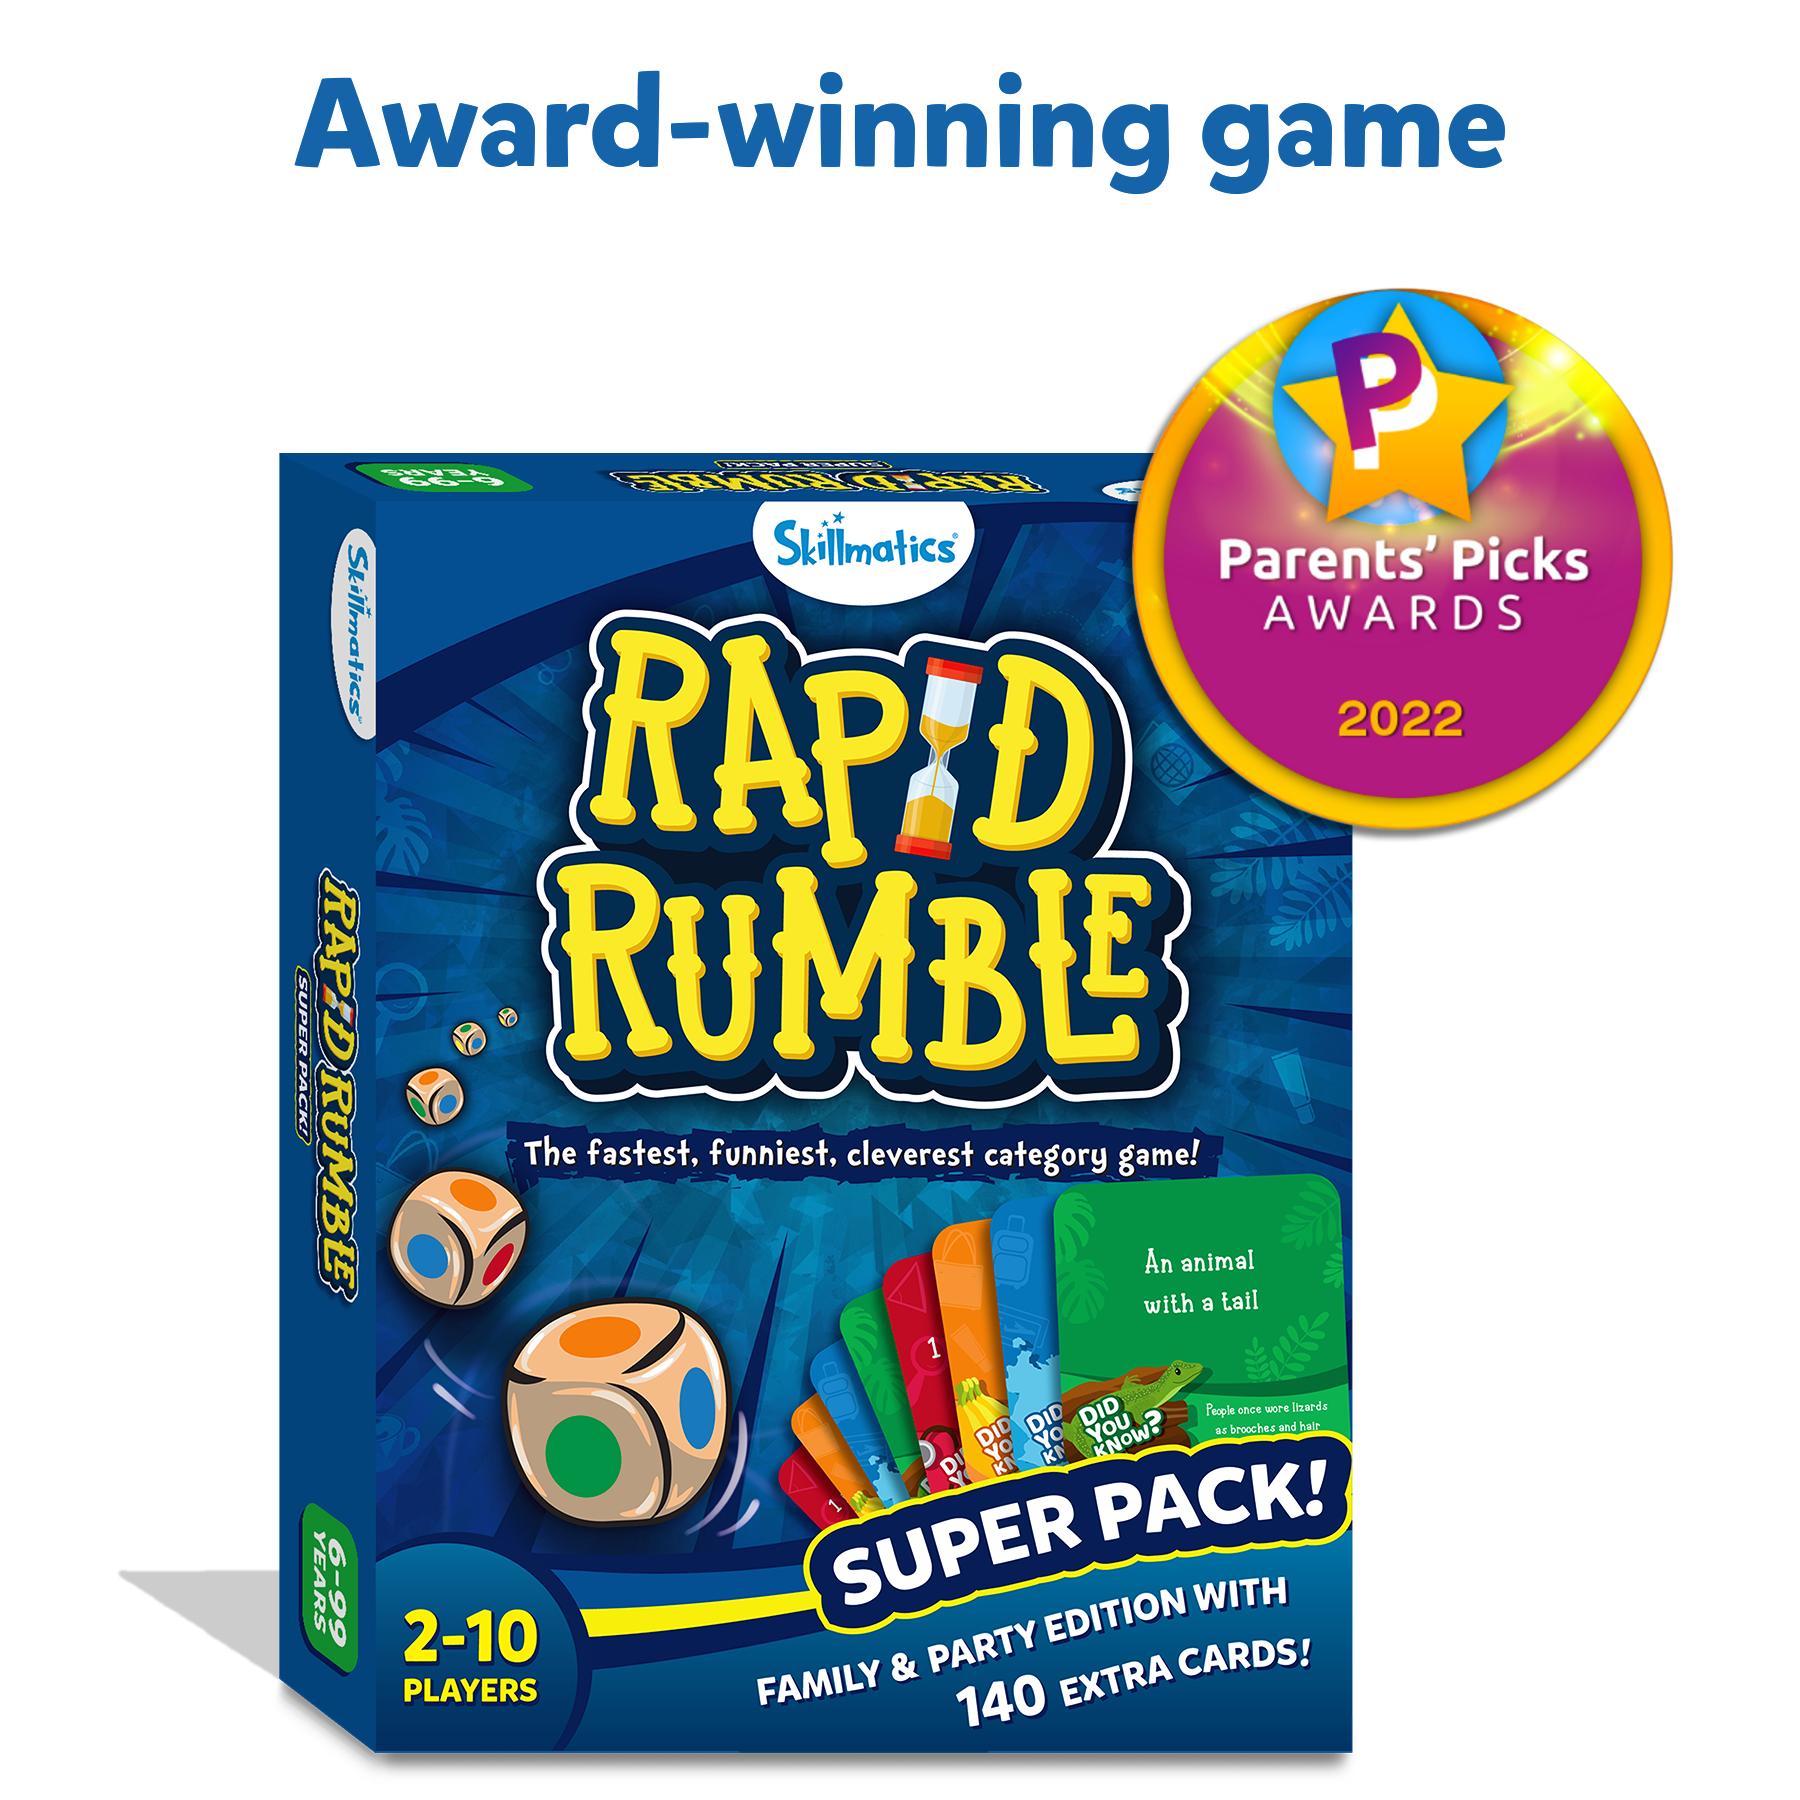 Skillmatics Board Game - Rapid Rumble Super Pack, Family & Party Edition with 140 Extra Cards